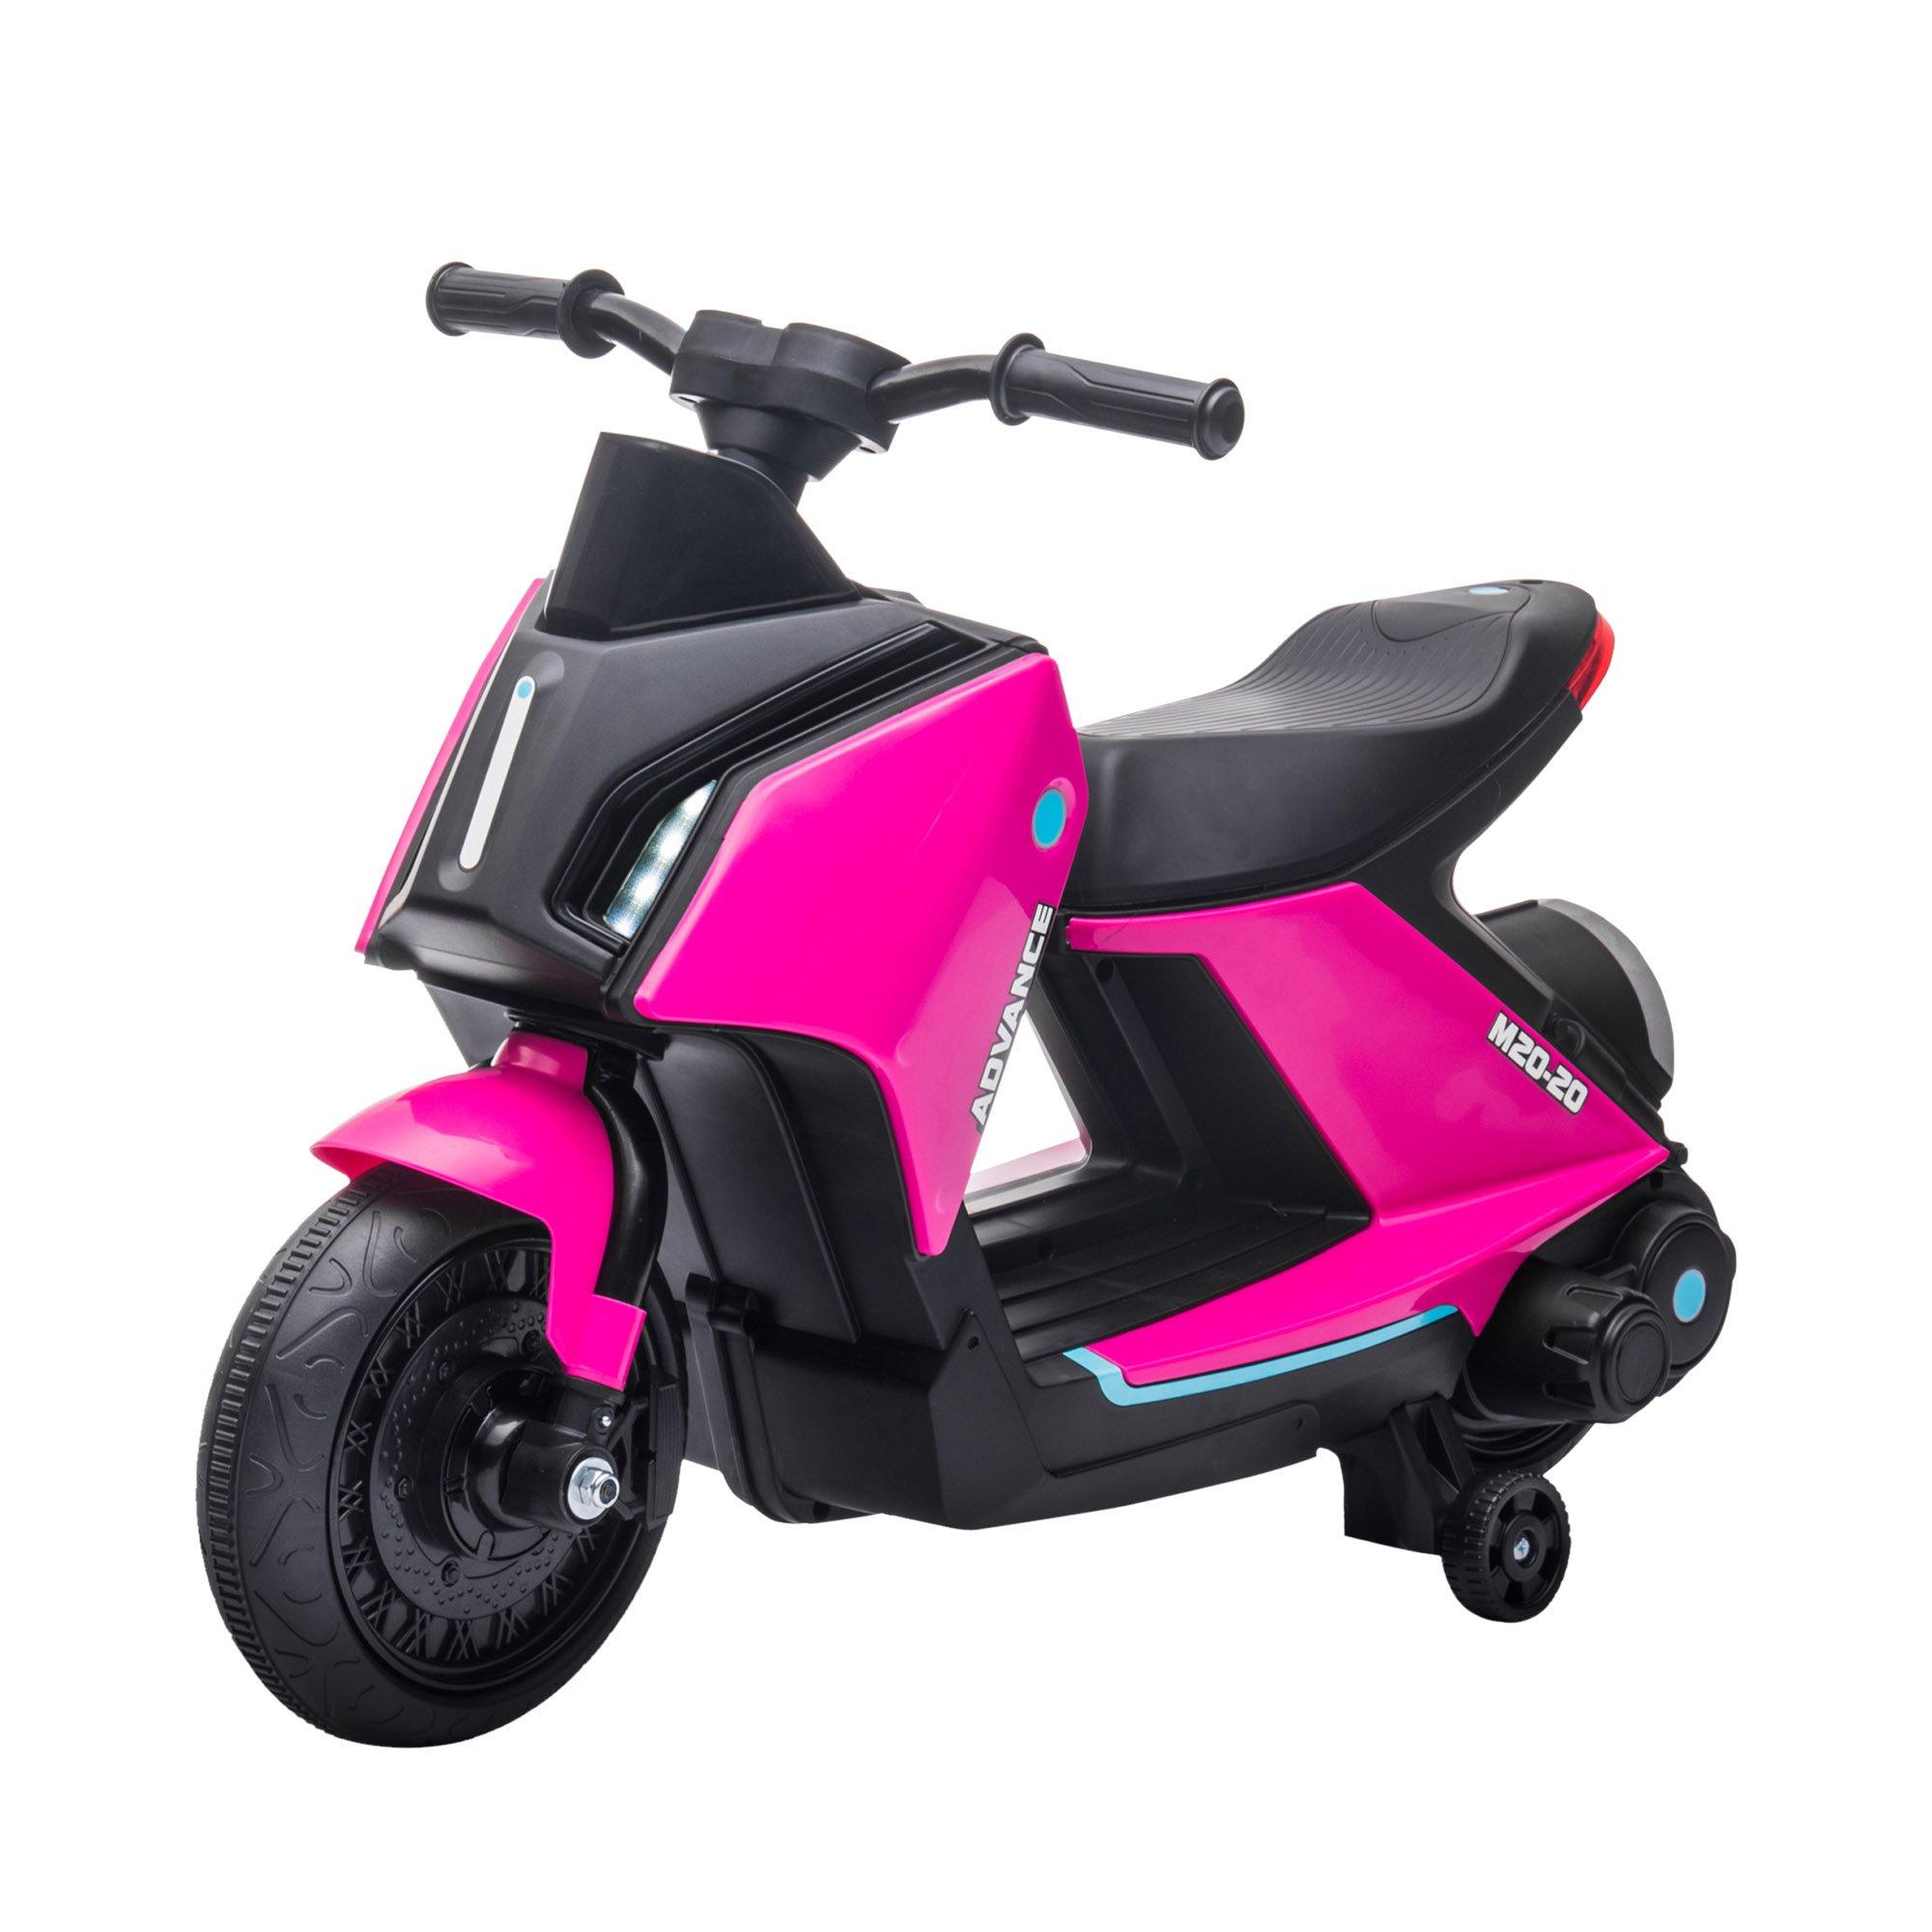 Homcom Kids Electric Motorcycle Ride-On Toy Pink